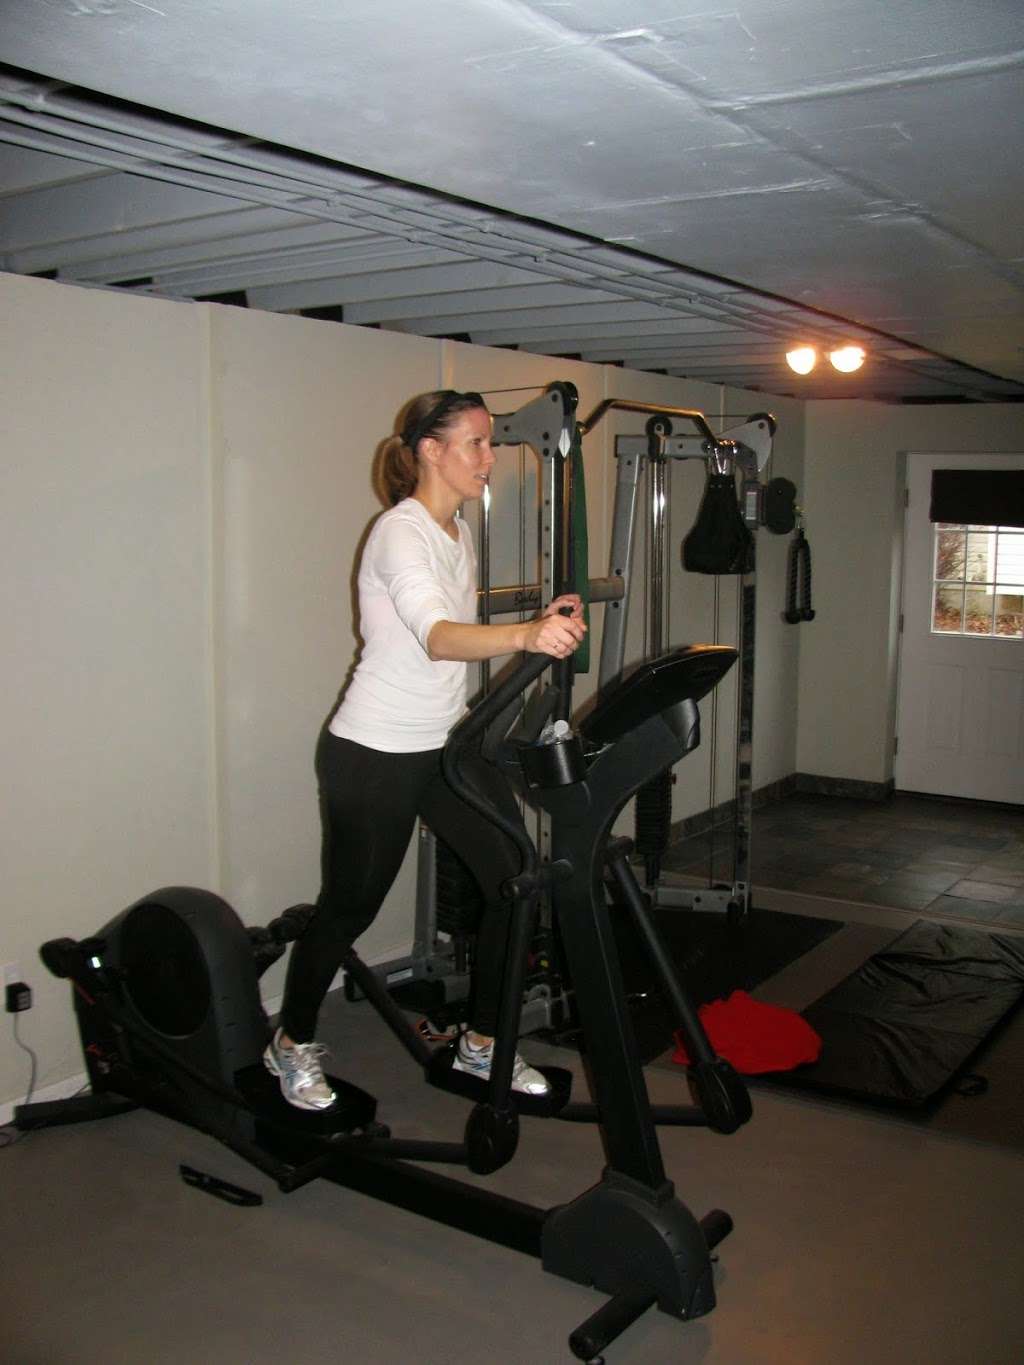 Berks County Personal Training | 80 Overlook Dr, Reading, PA 19606 | Phone: (610) 657-9201